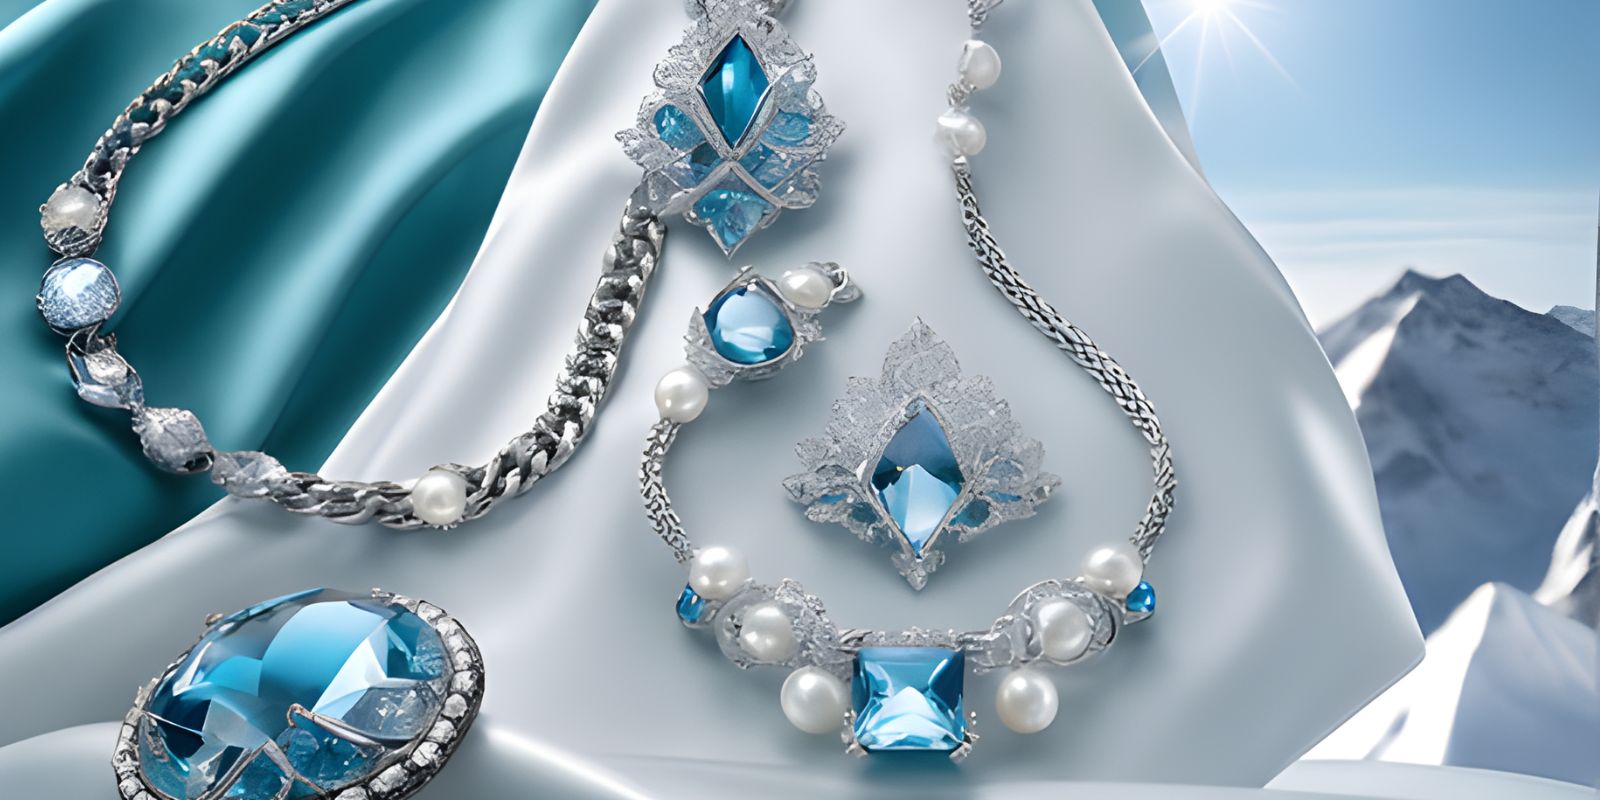 Silver Pendants in shades of azure and turquoise